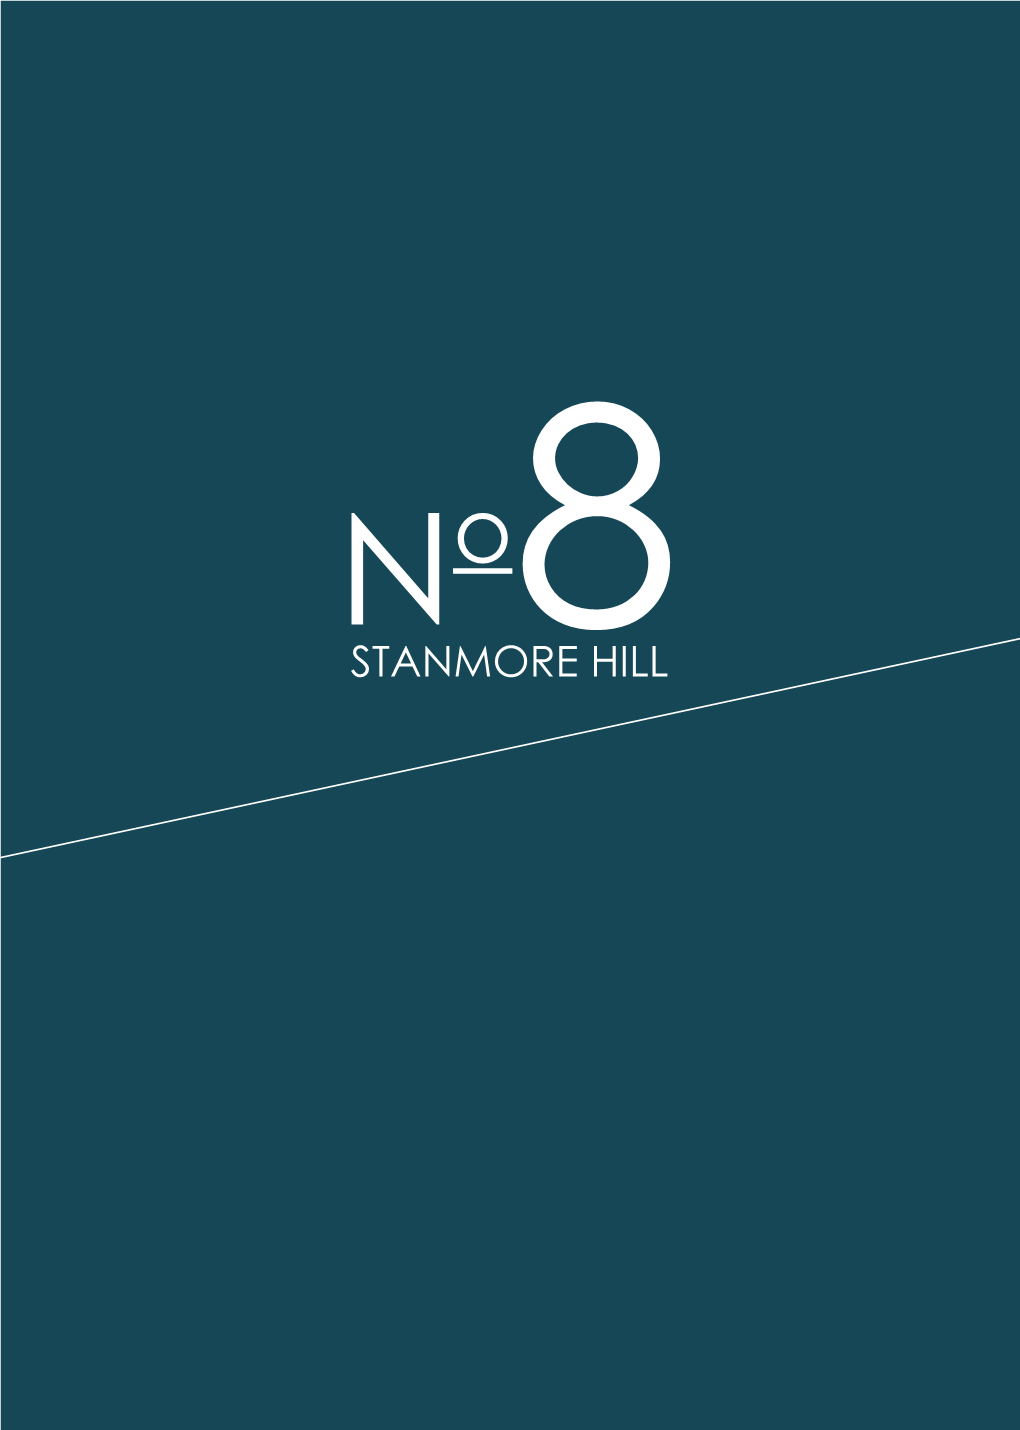 No8stanmore HILL